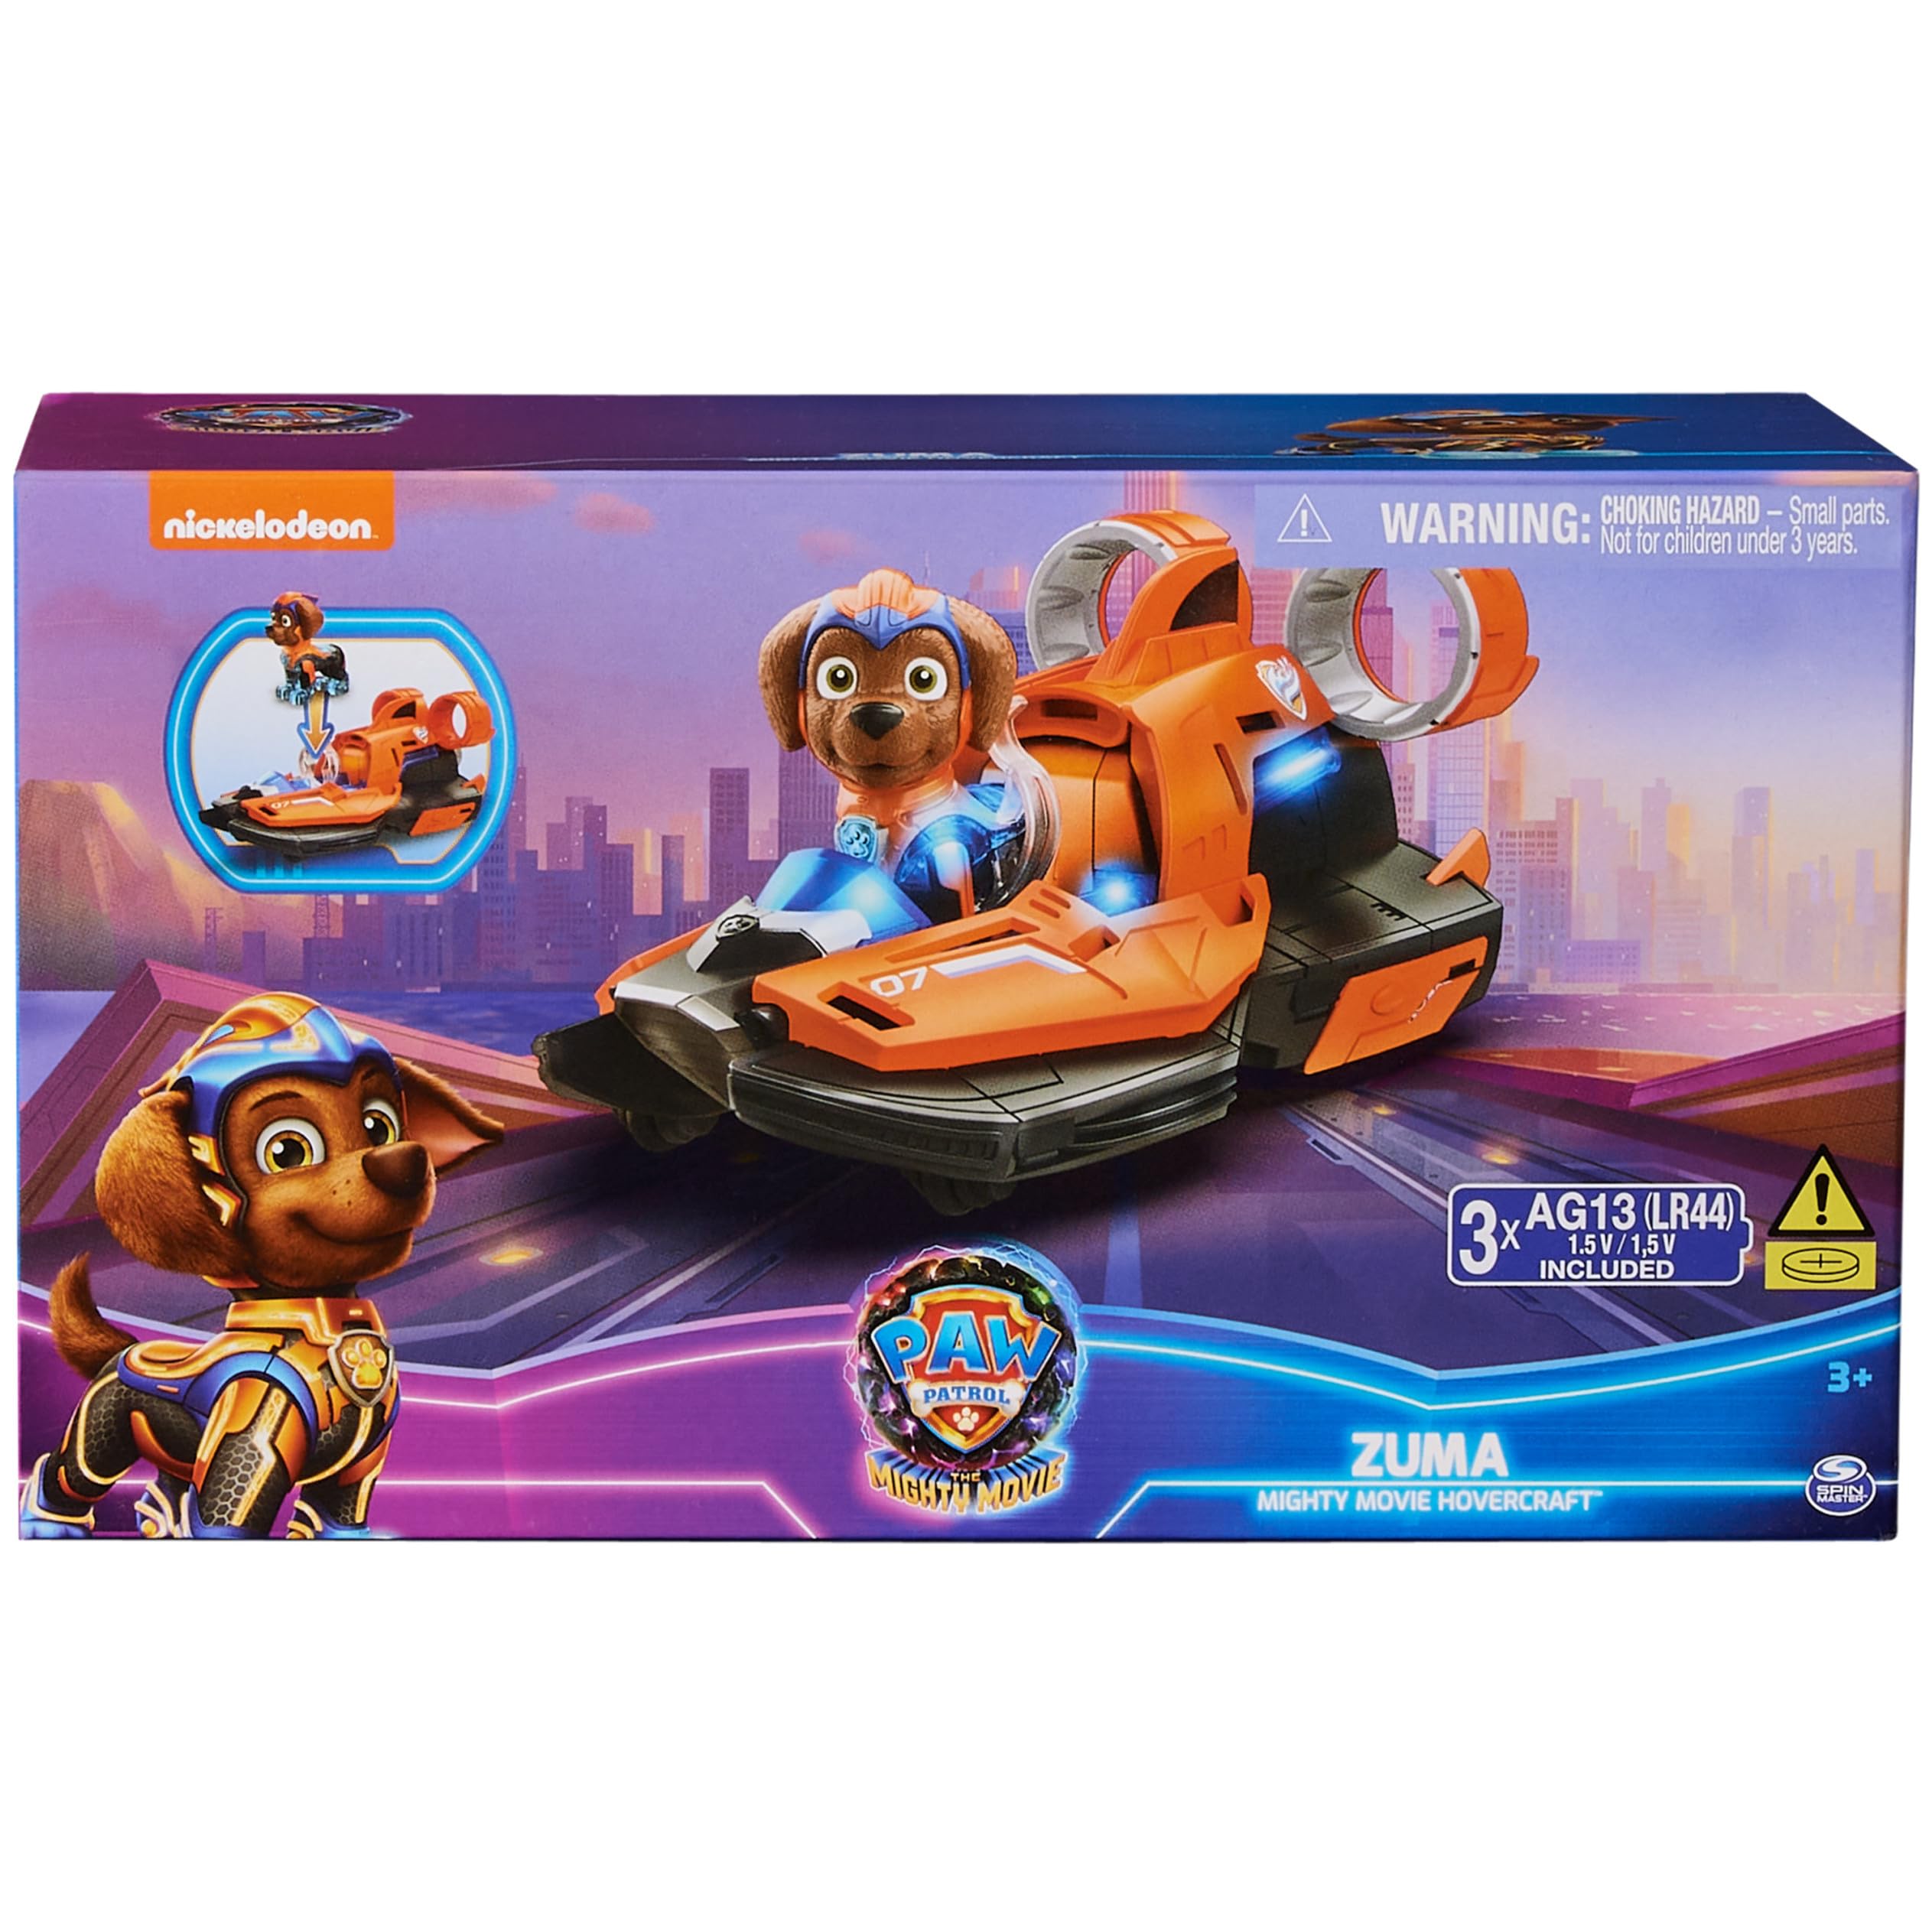 Paw Patrol: The Mighty Movie, Toy Jet Boat with Zuma Mighty Pups Action Figure, Lights and Sounds, Kids Toys for Boys & Girls 3+